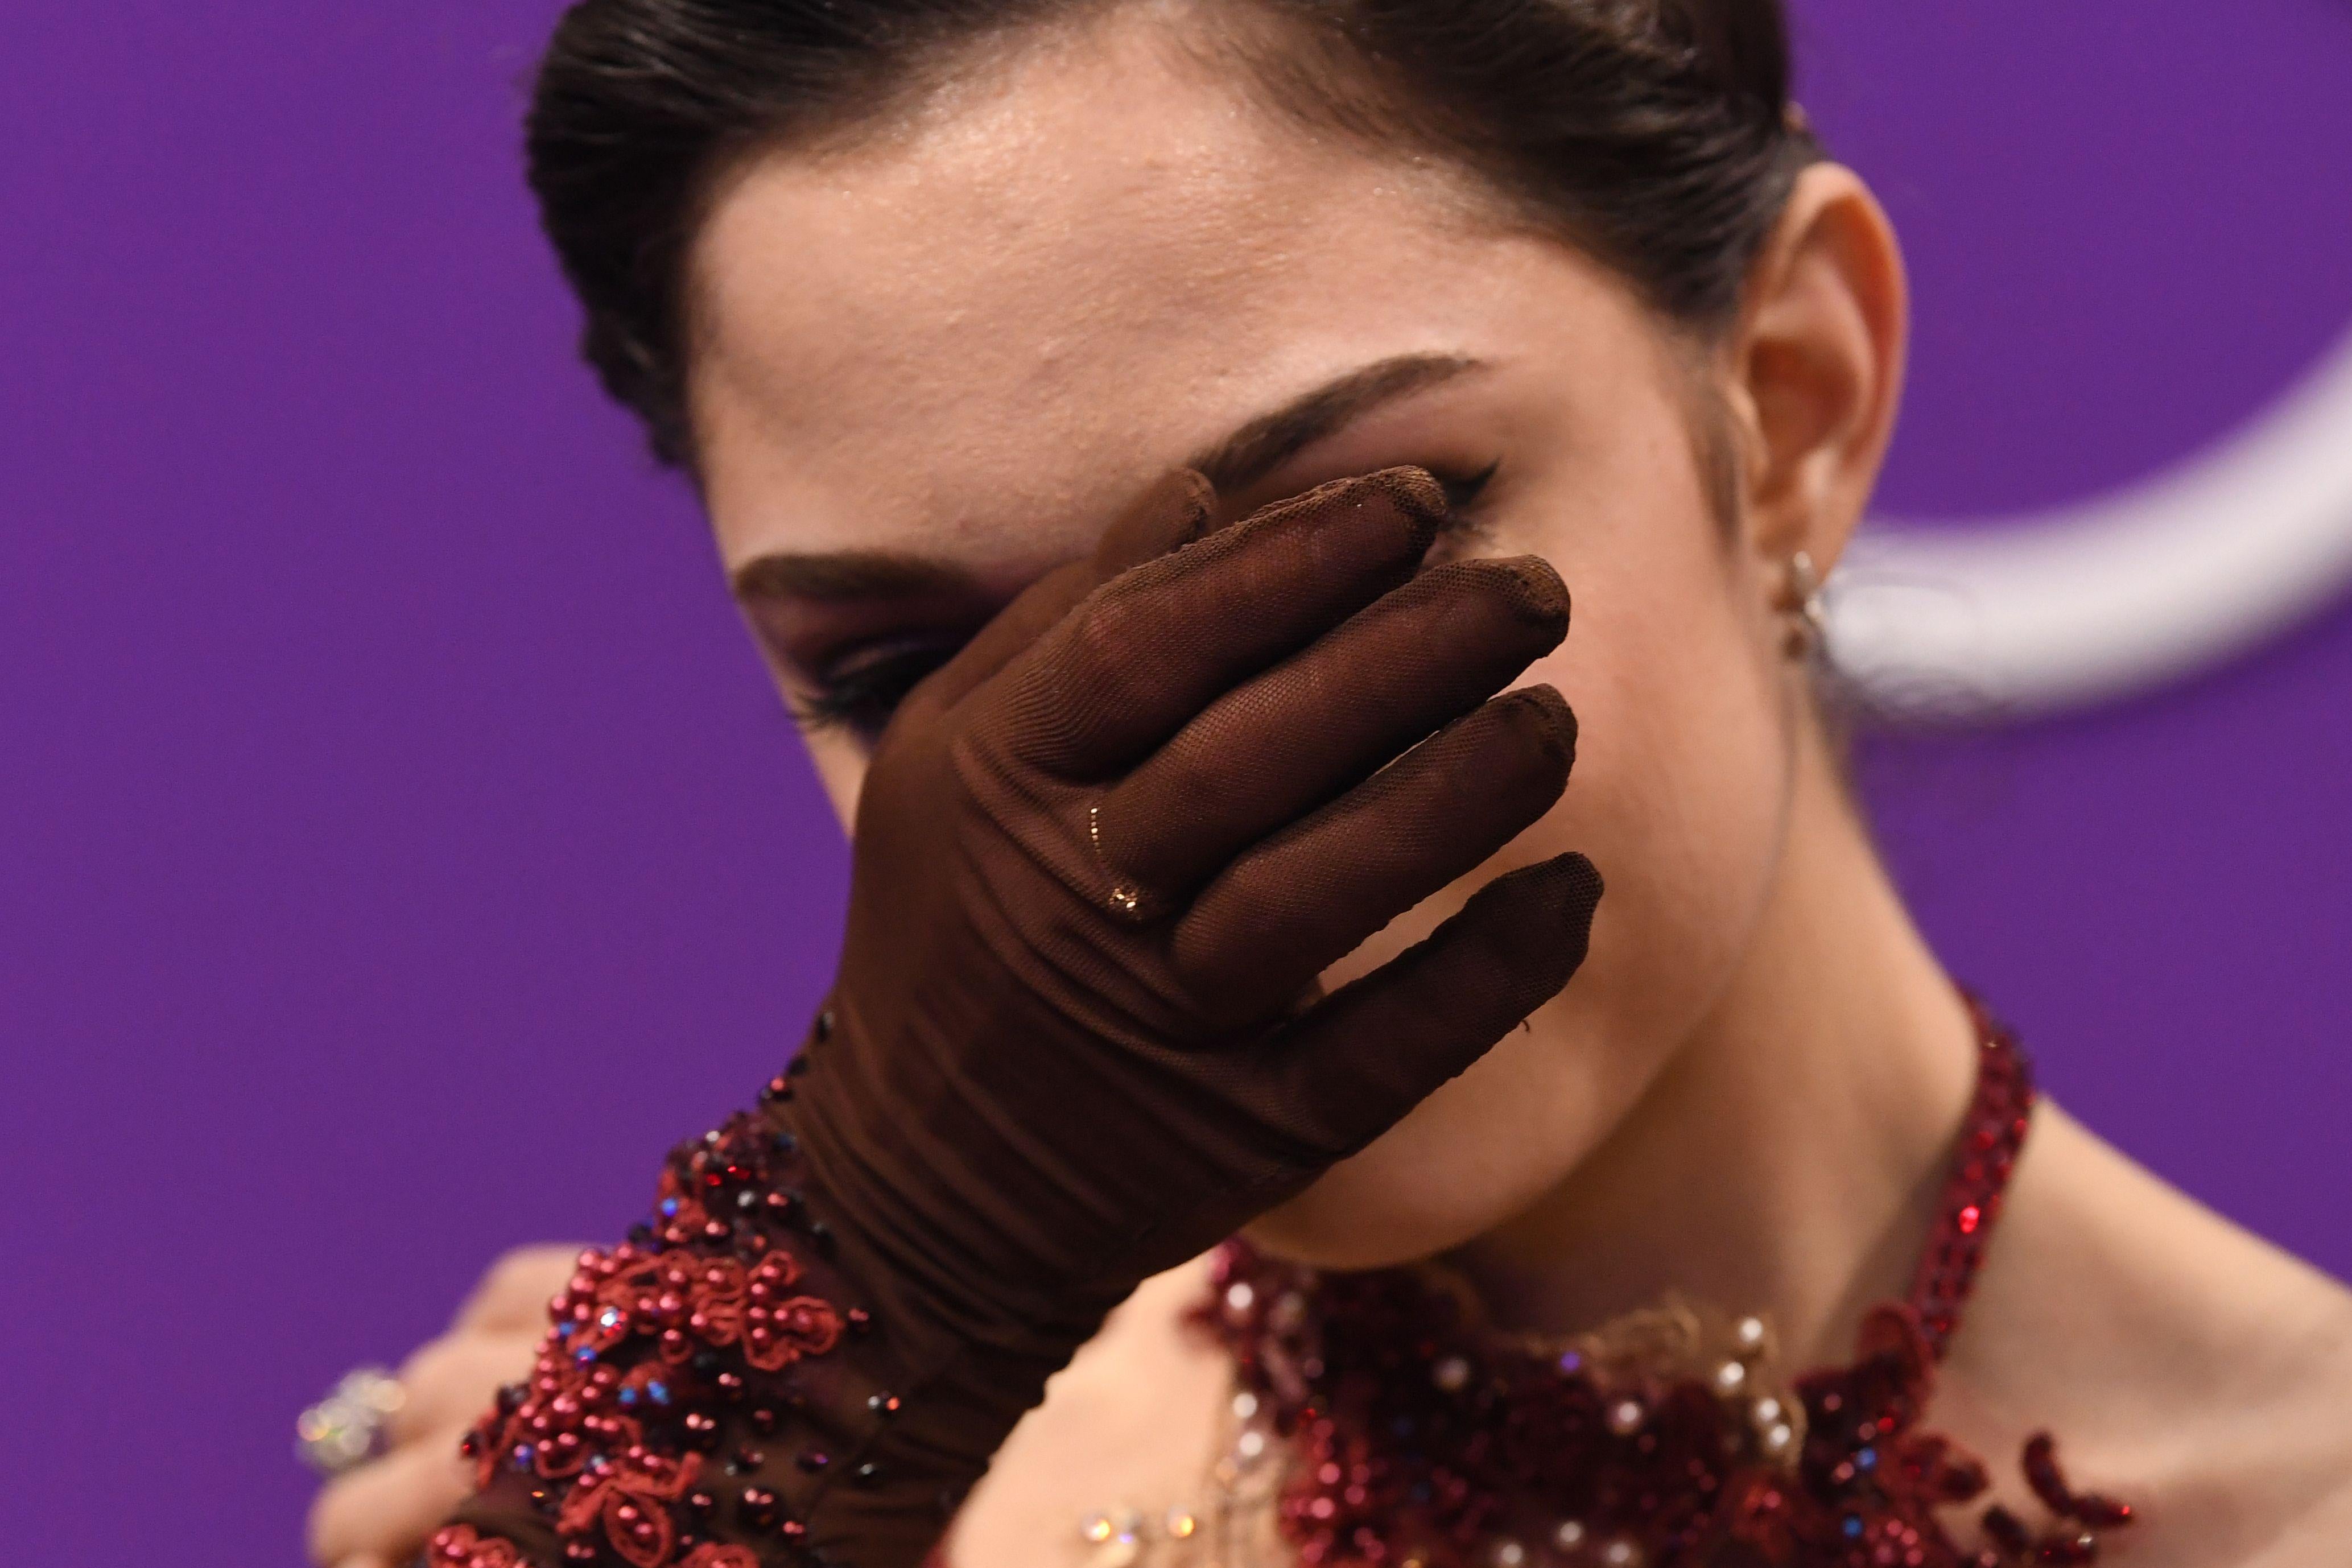 Russia's Evgenia Medvedeva reacts after the women's single skating free skating of the figure skating event during the Pyeongchang 2018 Winter Olympic Games at the Gangneung Ice Arena in Gangneung on February 23, 2018. / AFP PHOTO / Roberto SCHMIDT        (Photo credit should read ROBERTO SCHMIDT/AFP/Getty Images)